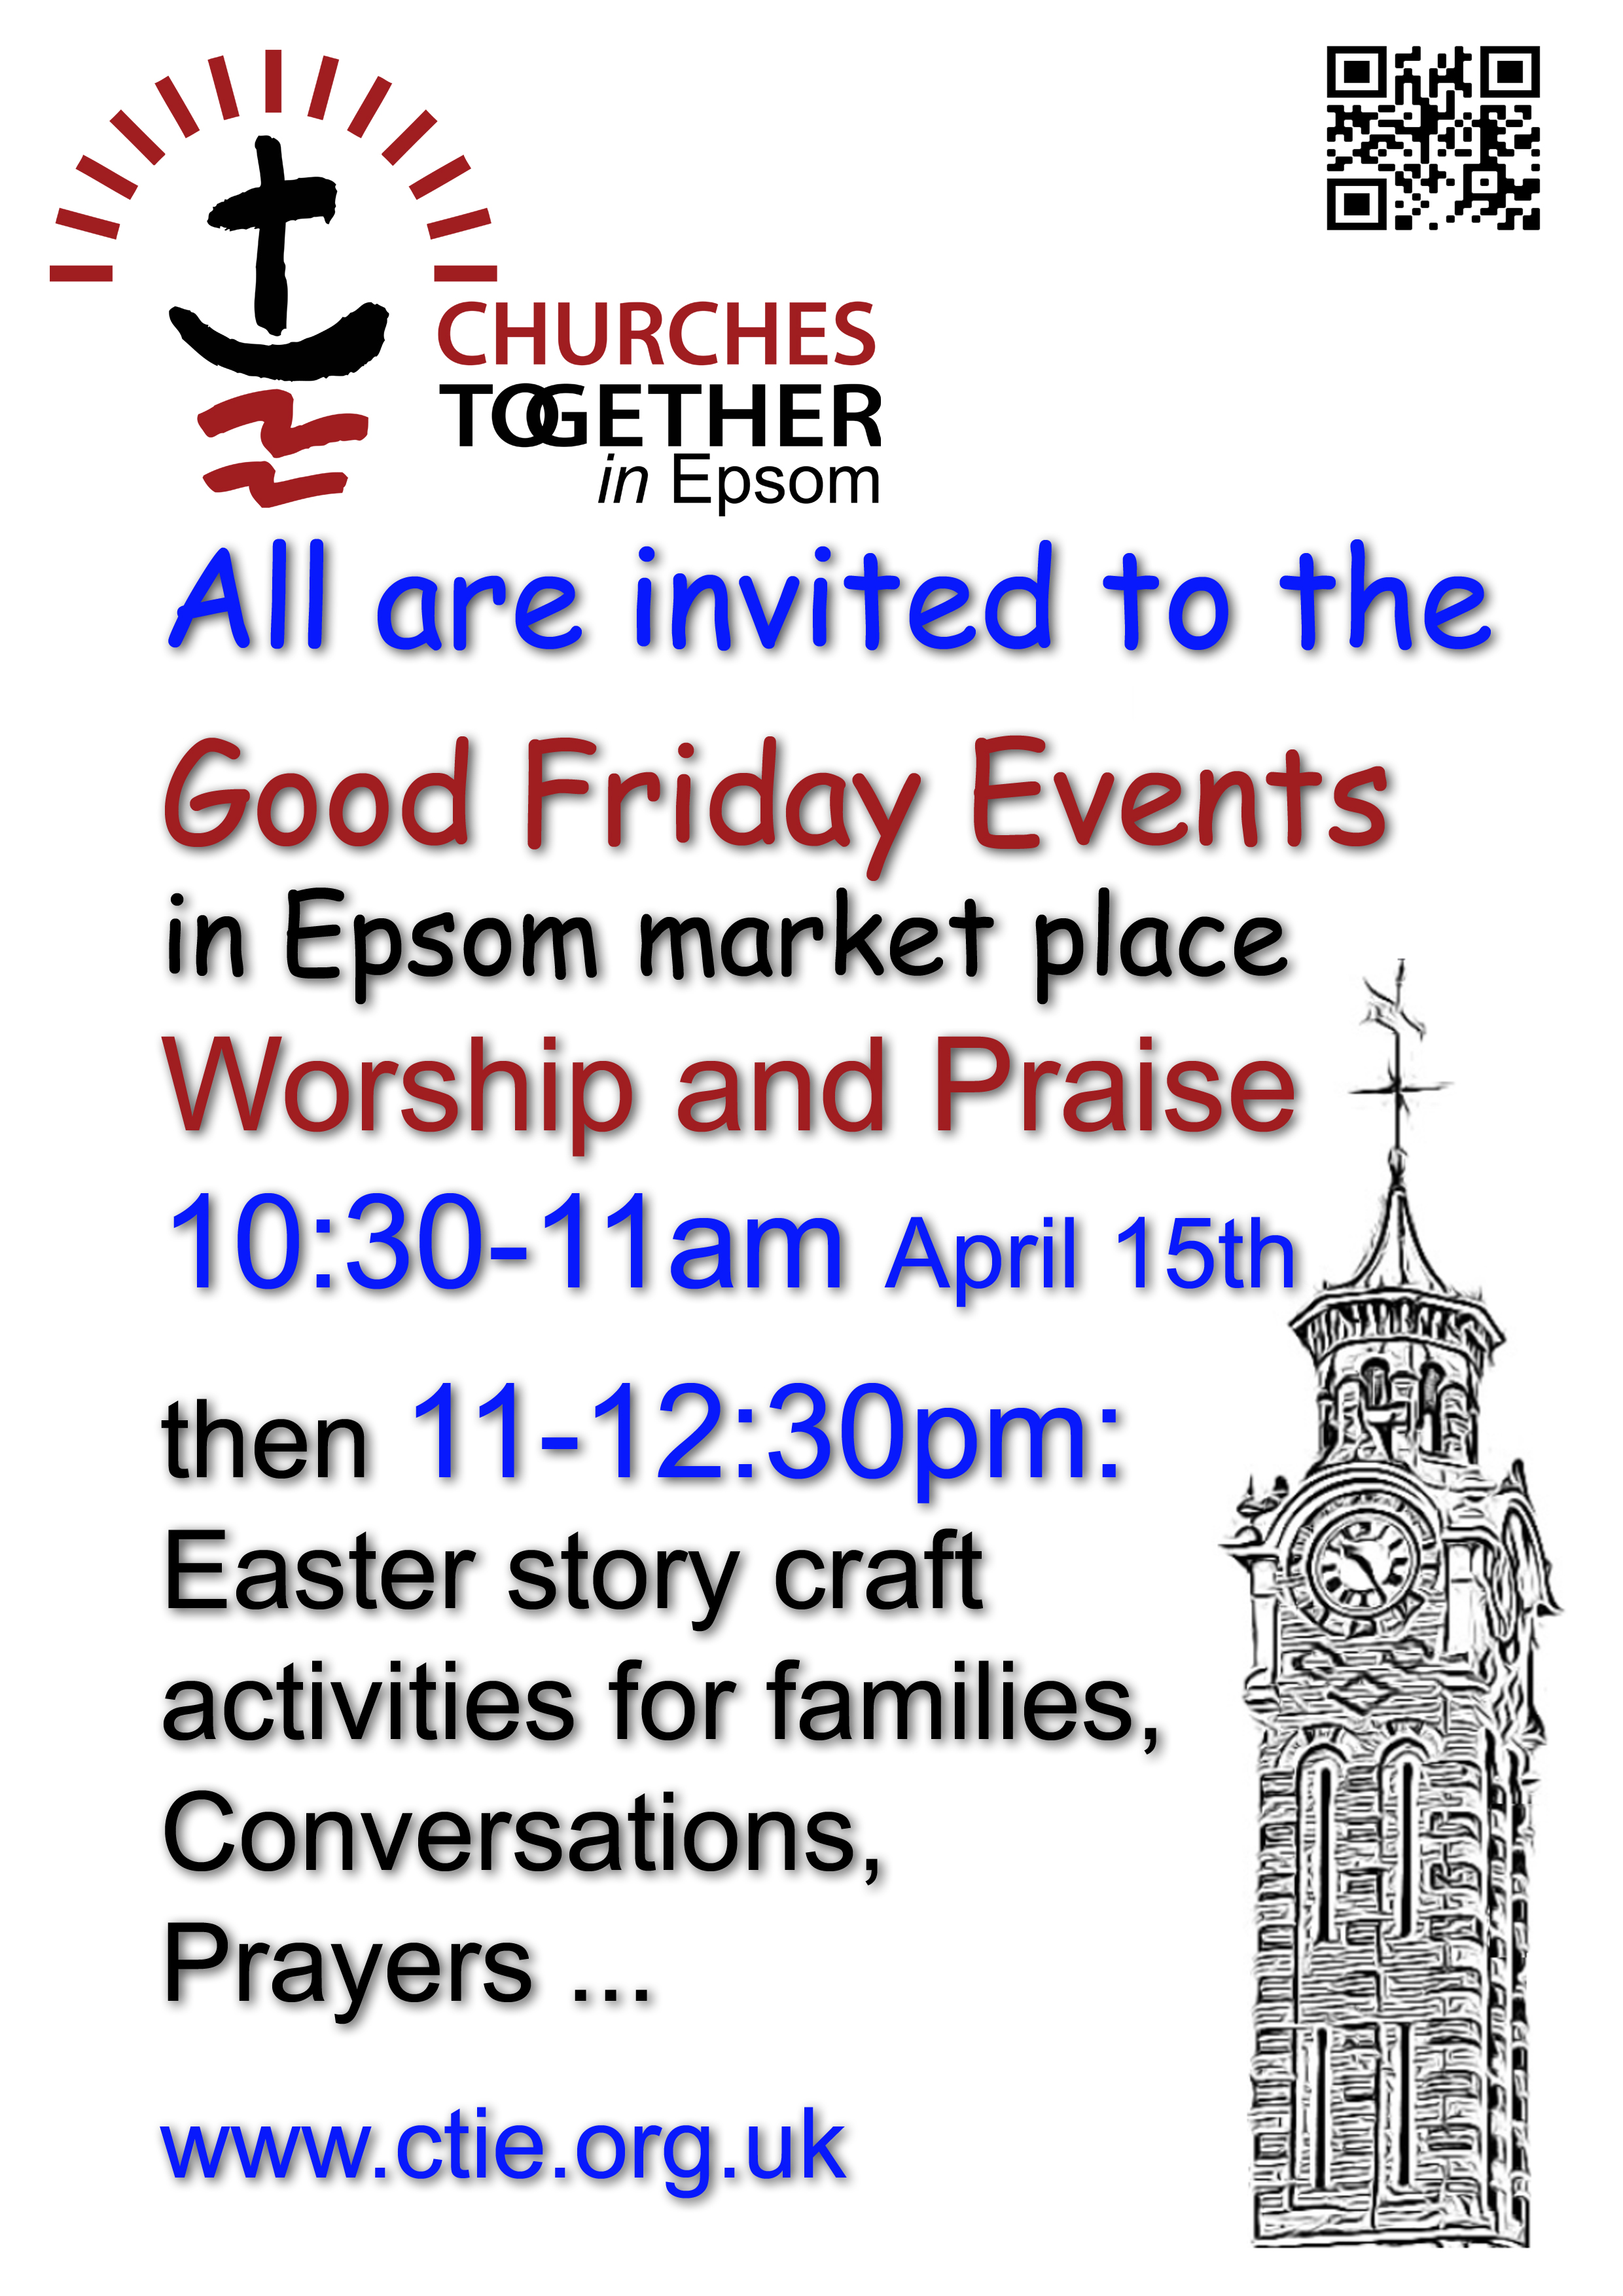 All are invited to the Good Friday Events in Epsom market place